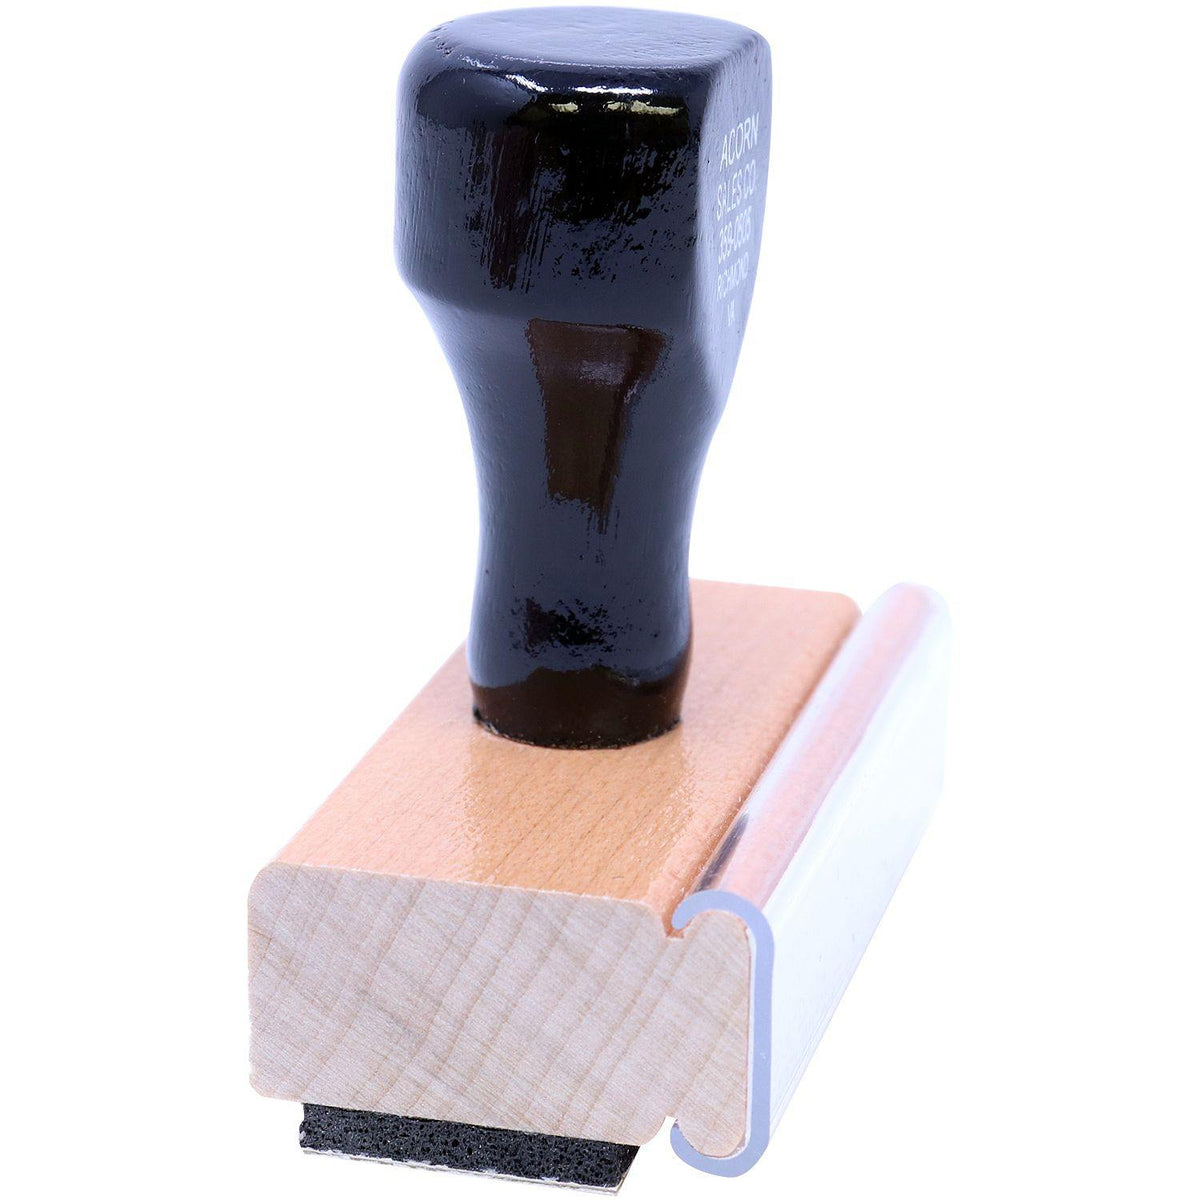 Side View of Diabetic Rubber Stamp at an Angle